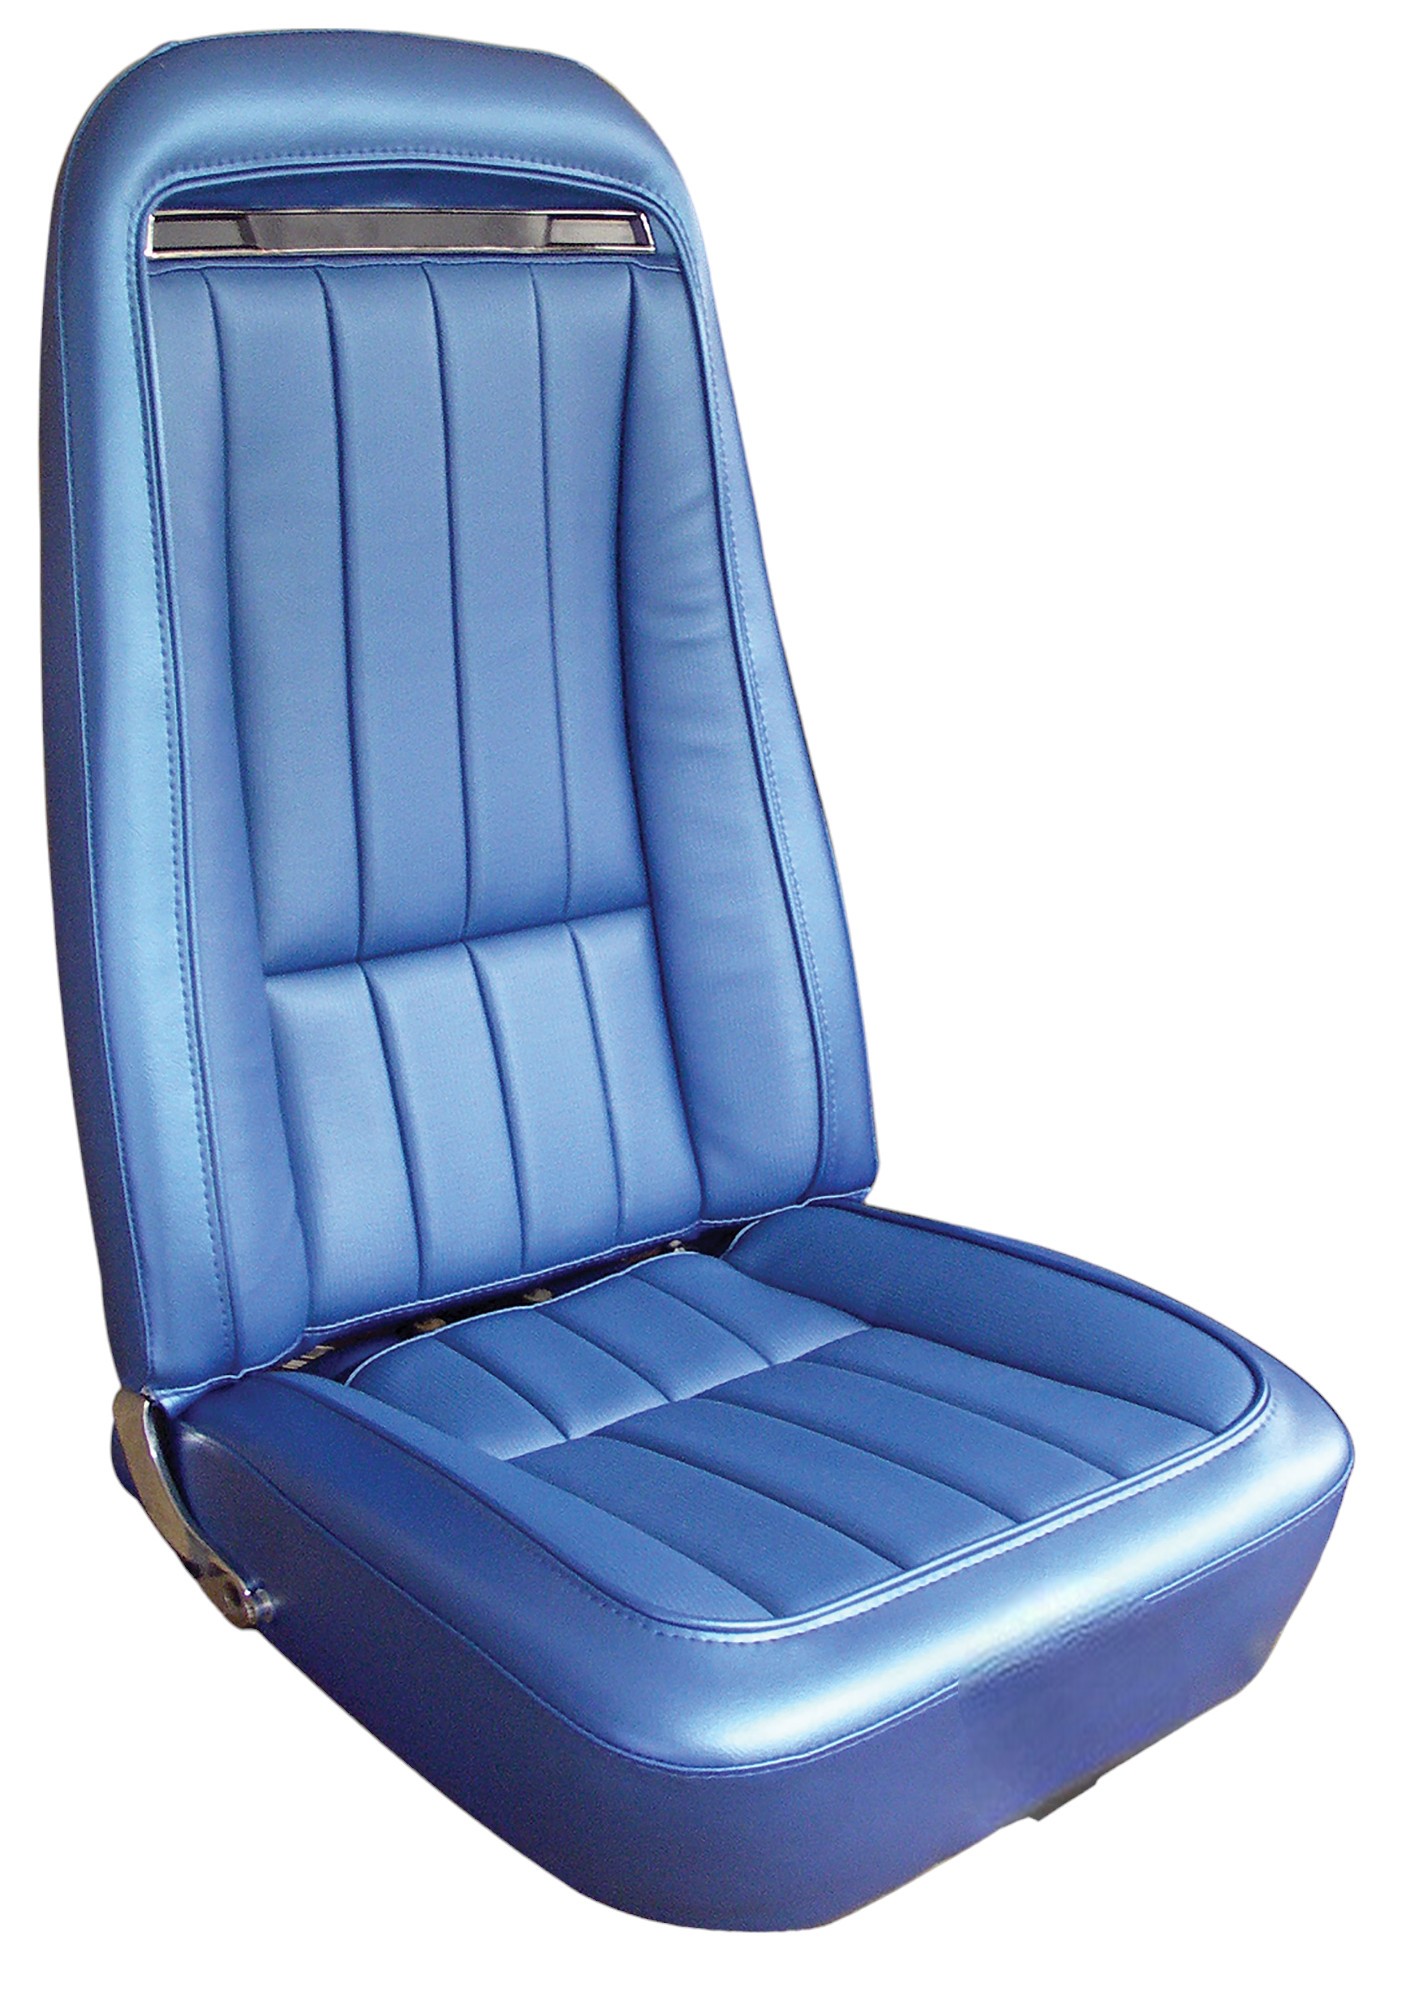 1970 C3 Corvette Mounted Seats Bright Blue "Leather-Like" Vinyl With Shoulder Harness